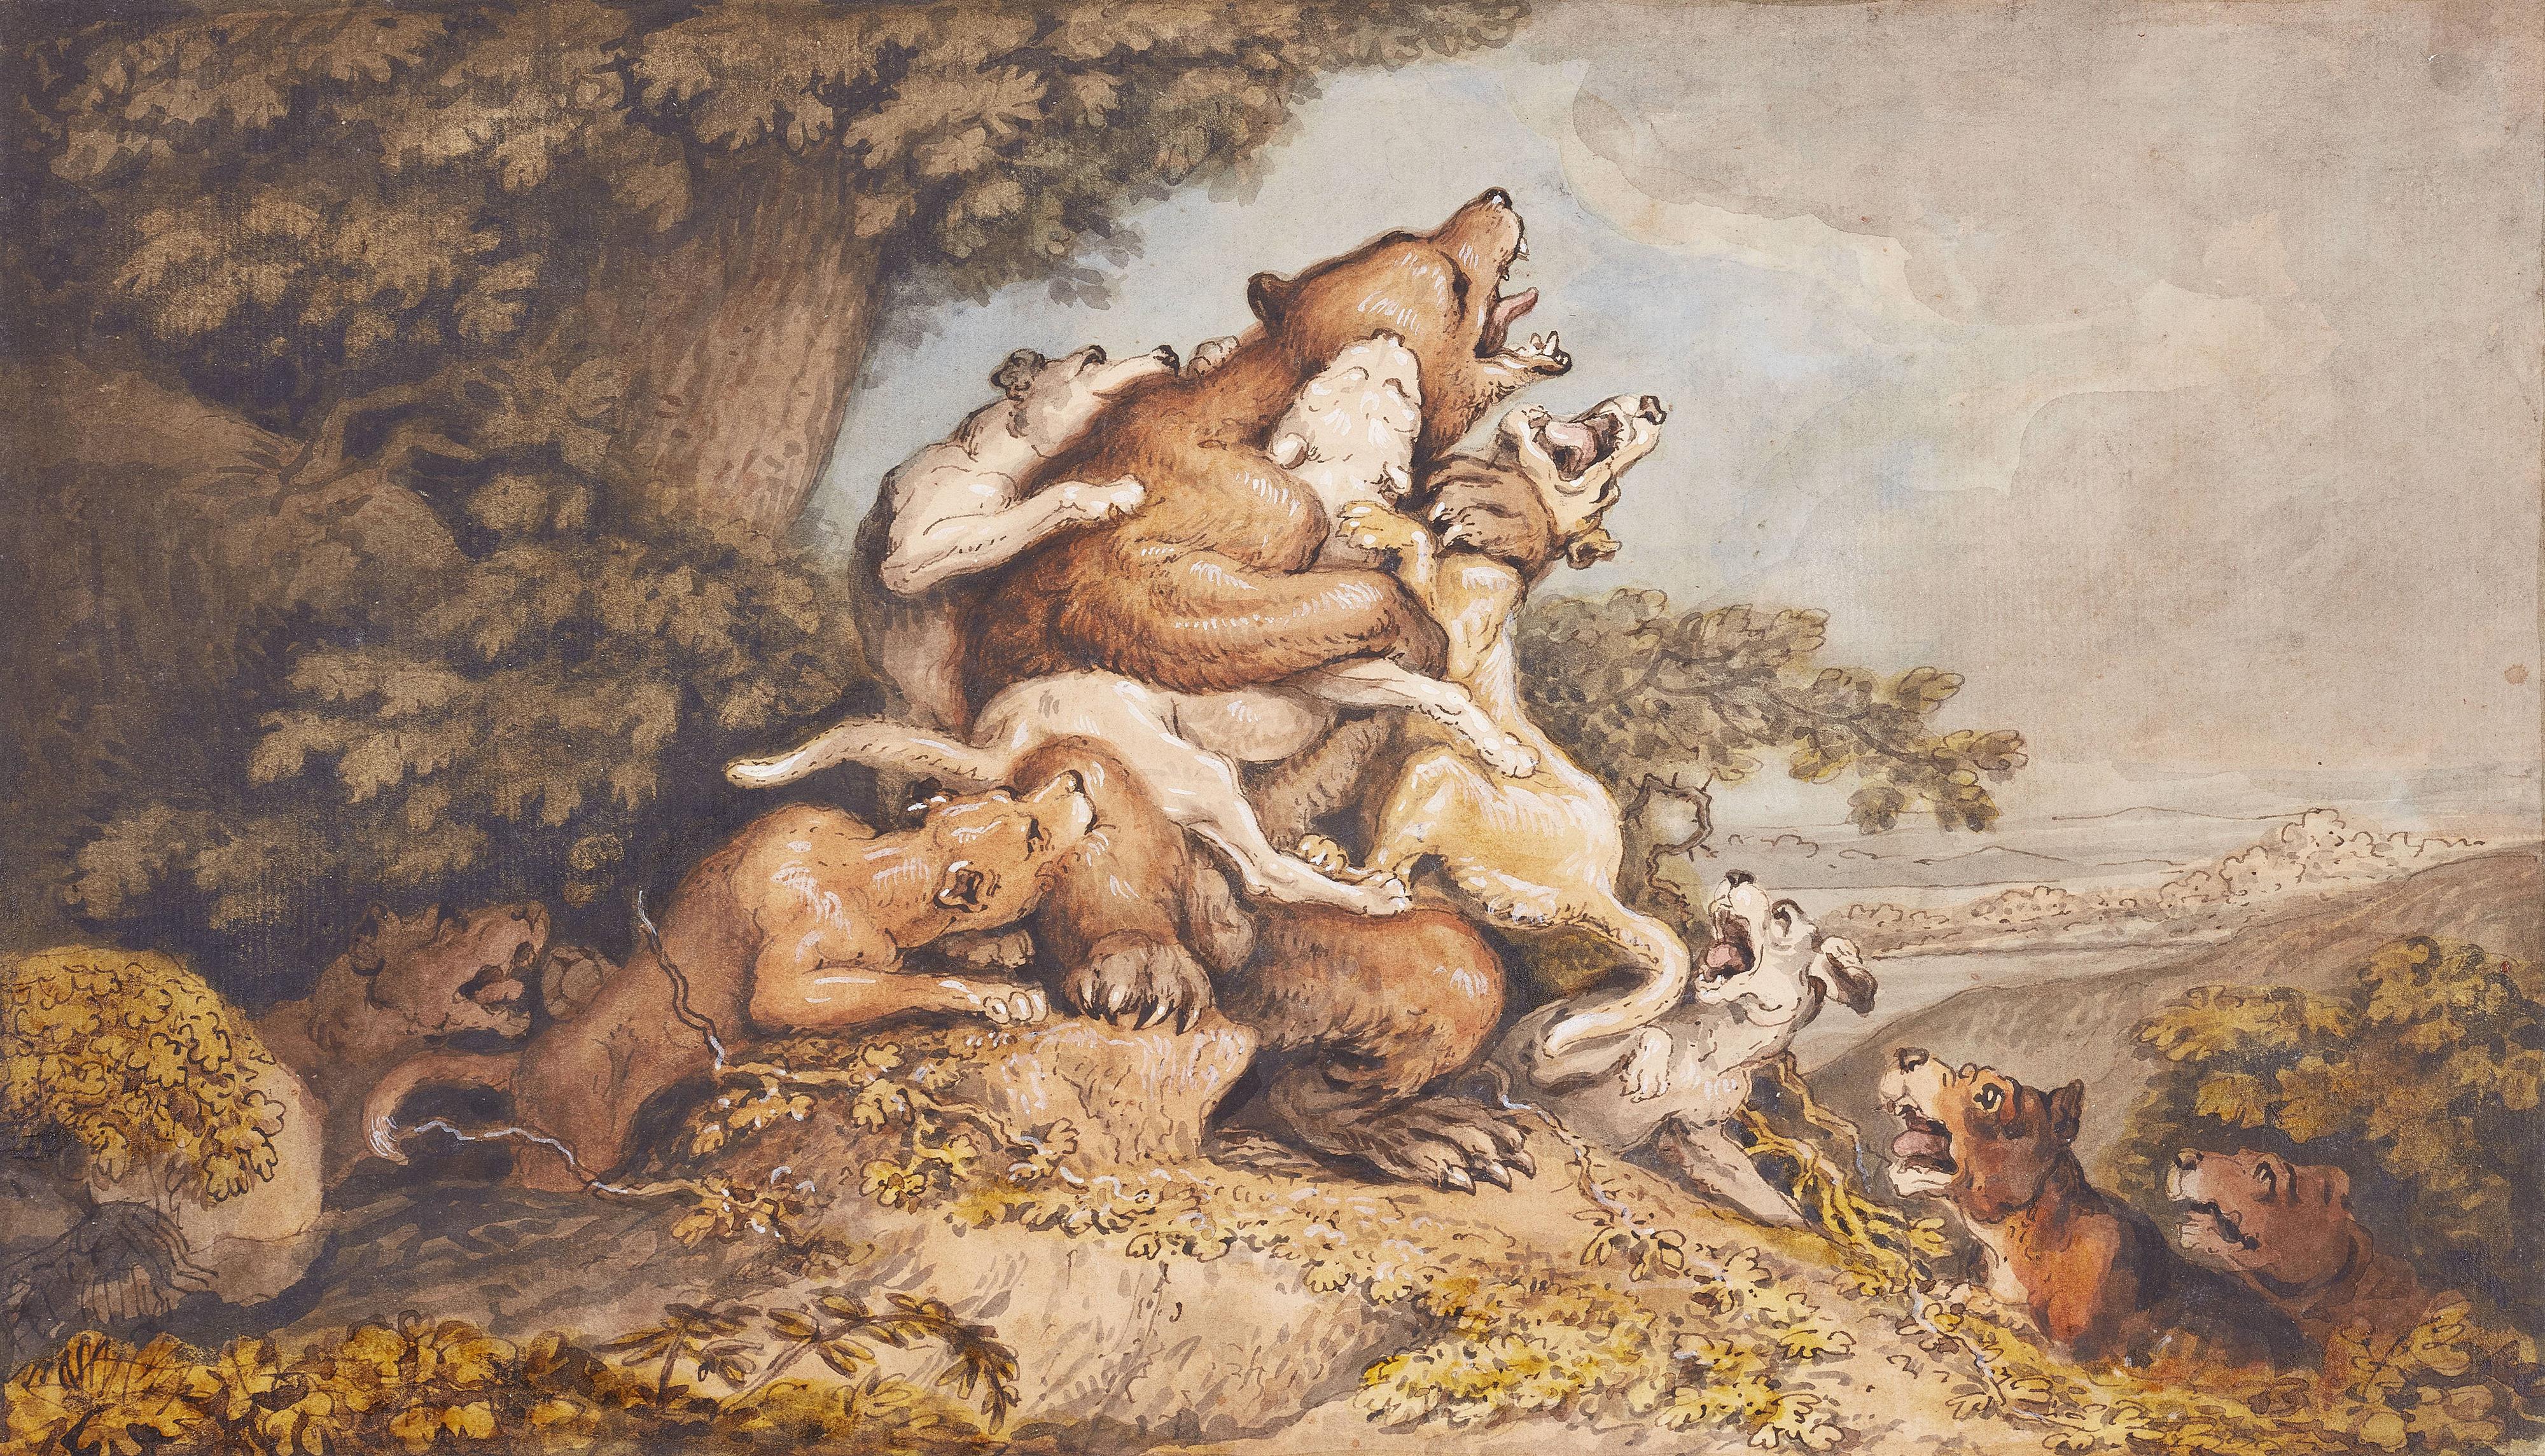 Johann Heinrich Wilhelm Tischbein - Bear fighting with hunting Dogs

Includes: Chalk sketch, hunting dog attacks a bear - image-1